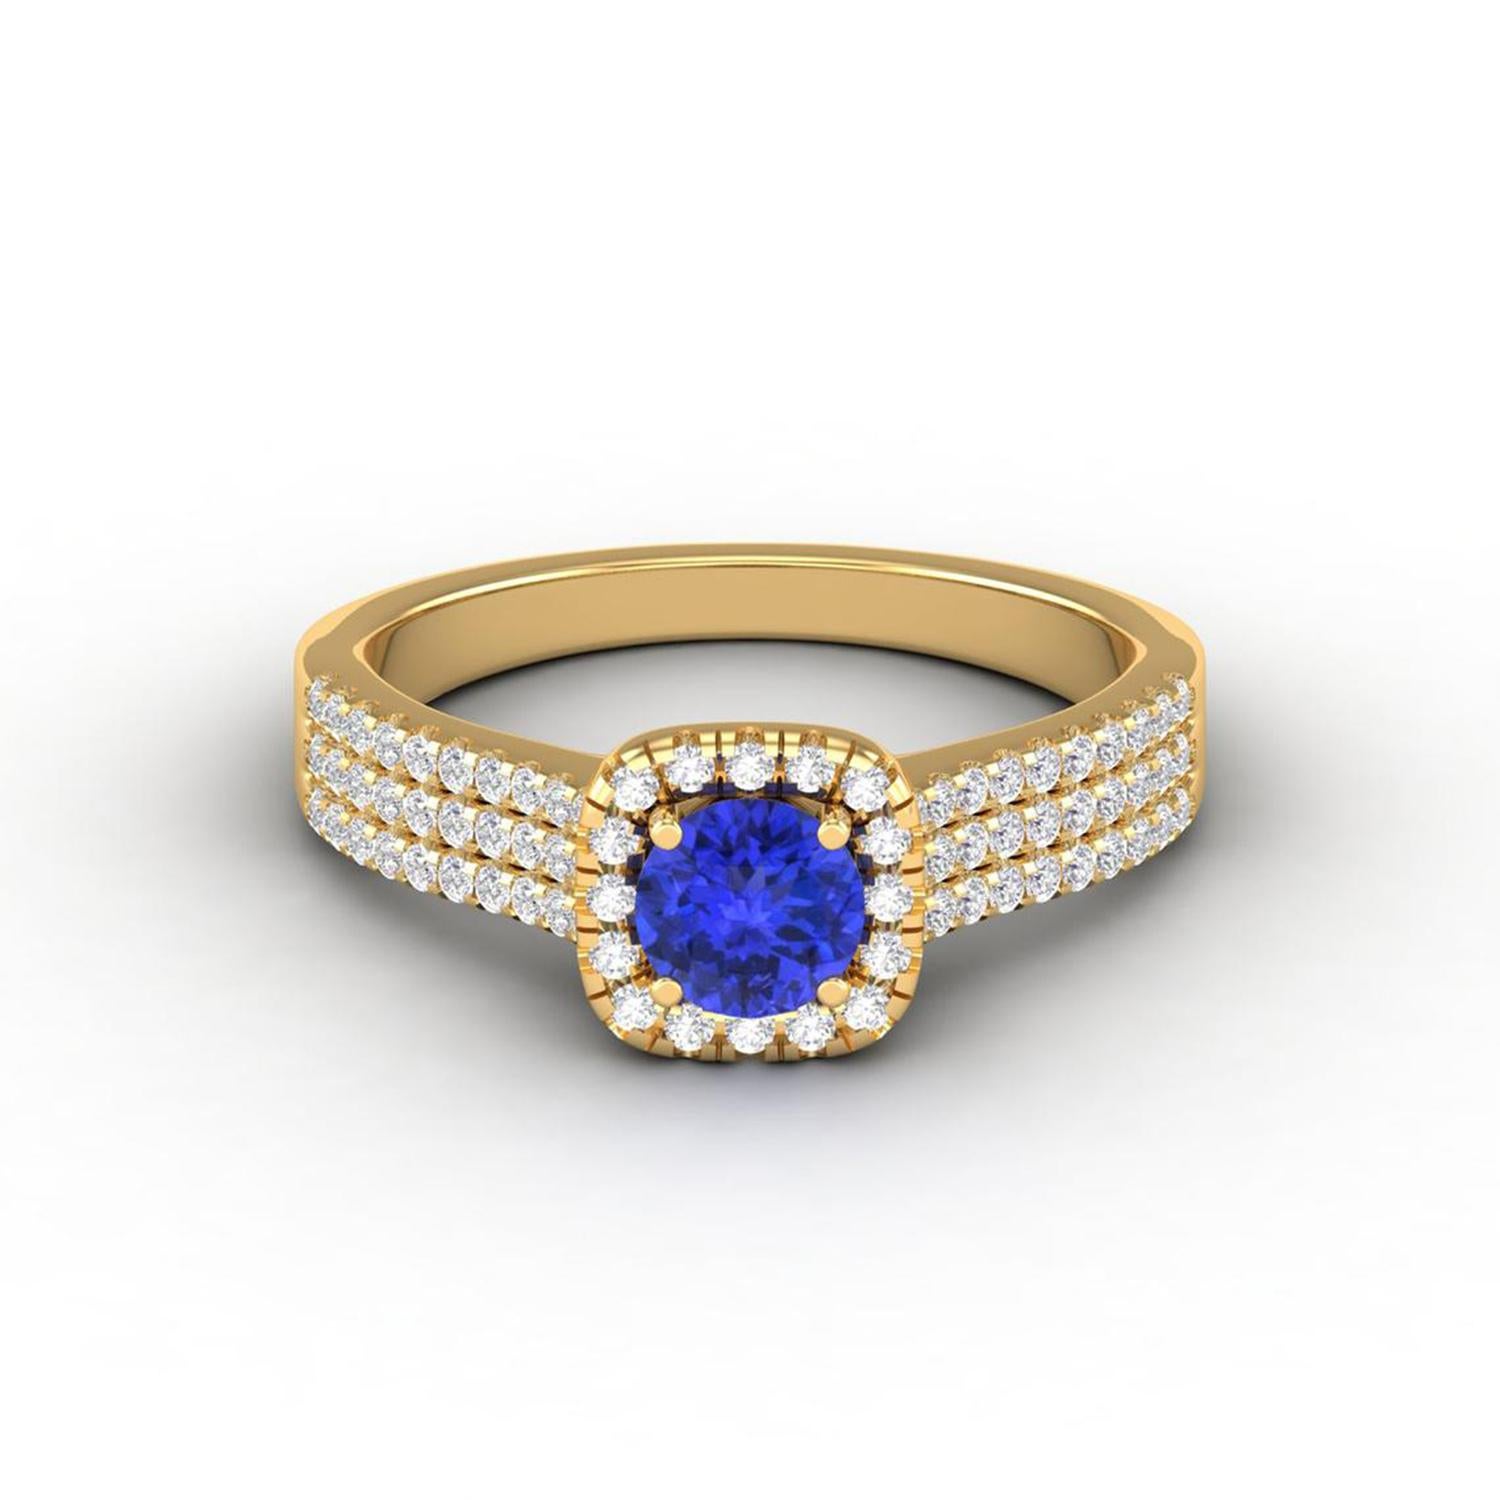 Women's 14 Karat Gold Tanzanite Ring / Diamond Solitaire Ring / Ring for Her For Sale